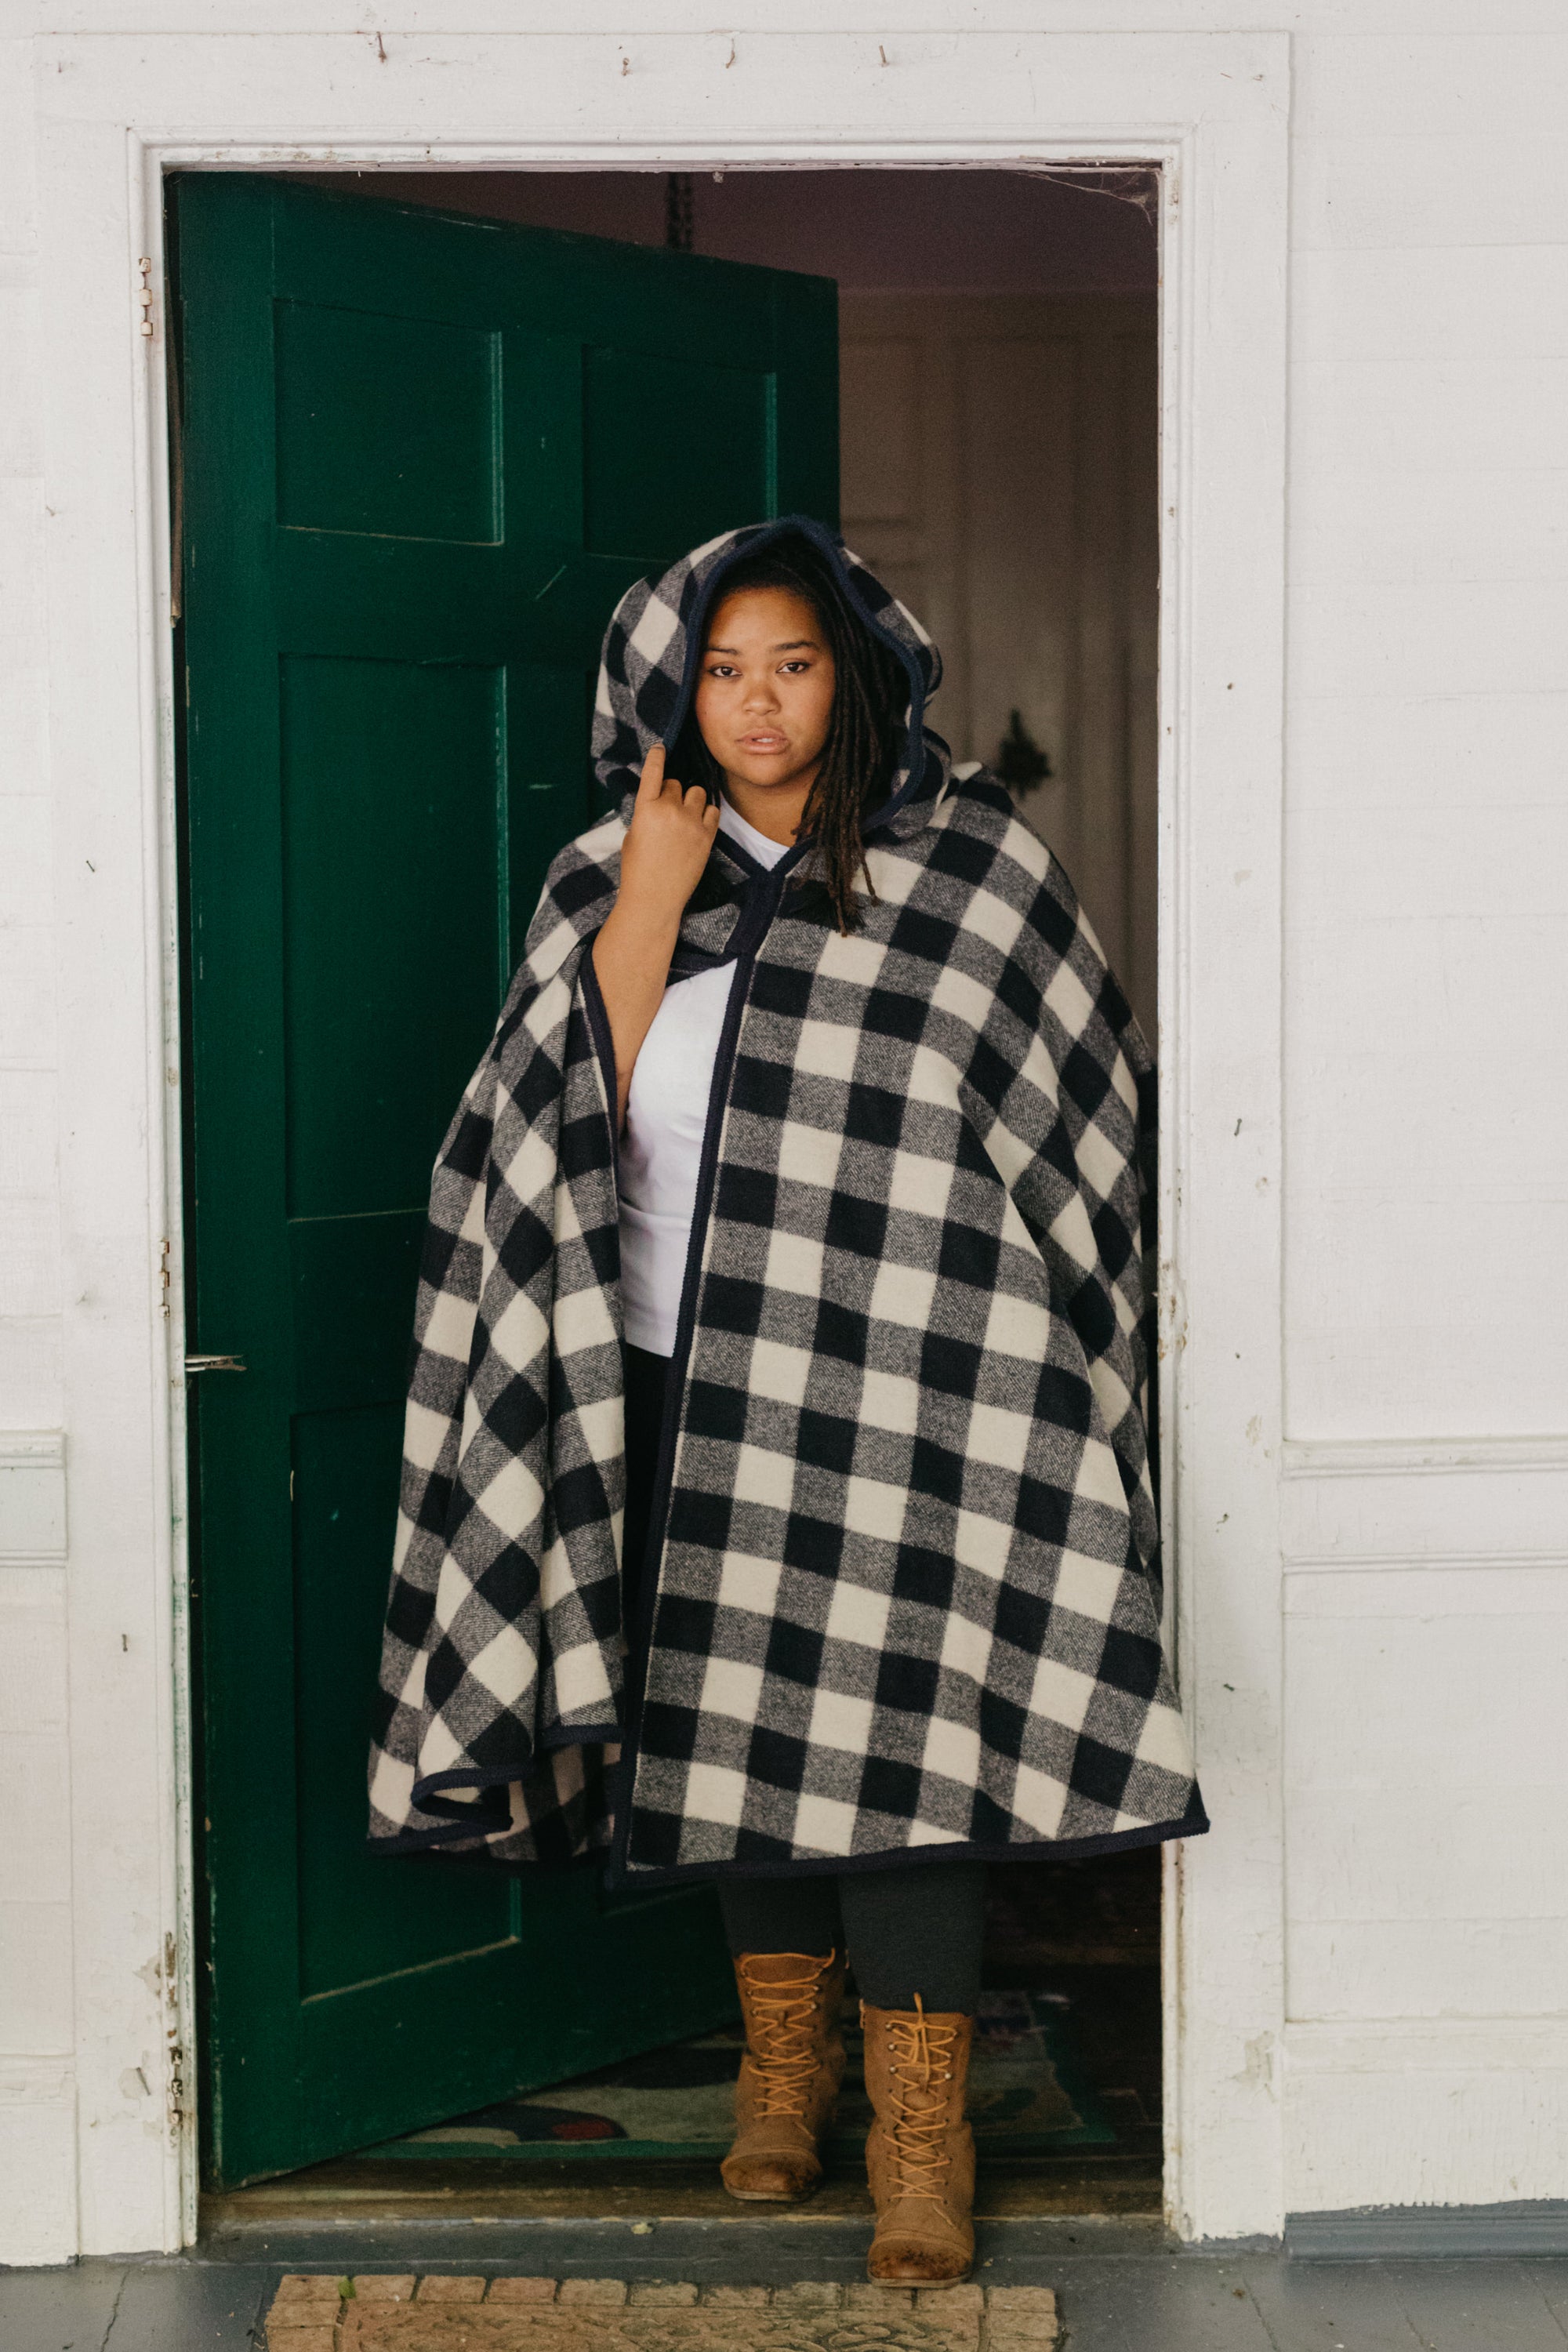 Black woman standing in a door wearing a large black and white checked burnoose with the hood up.